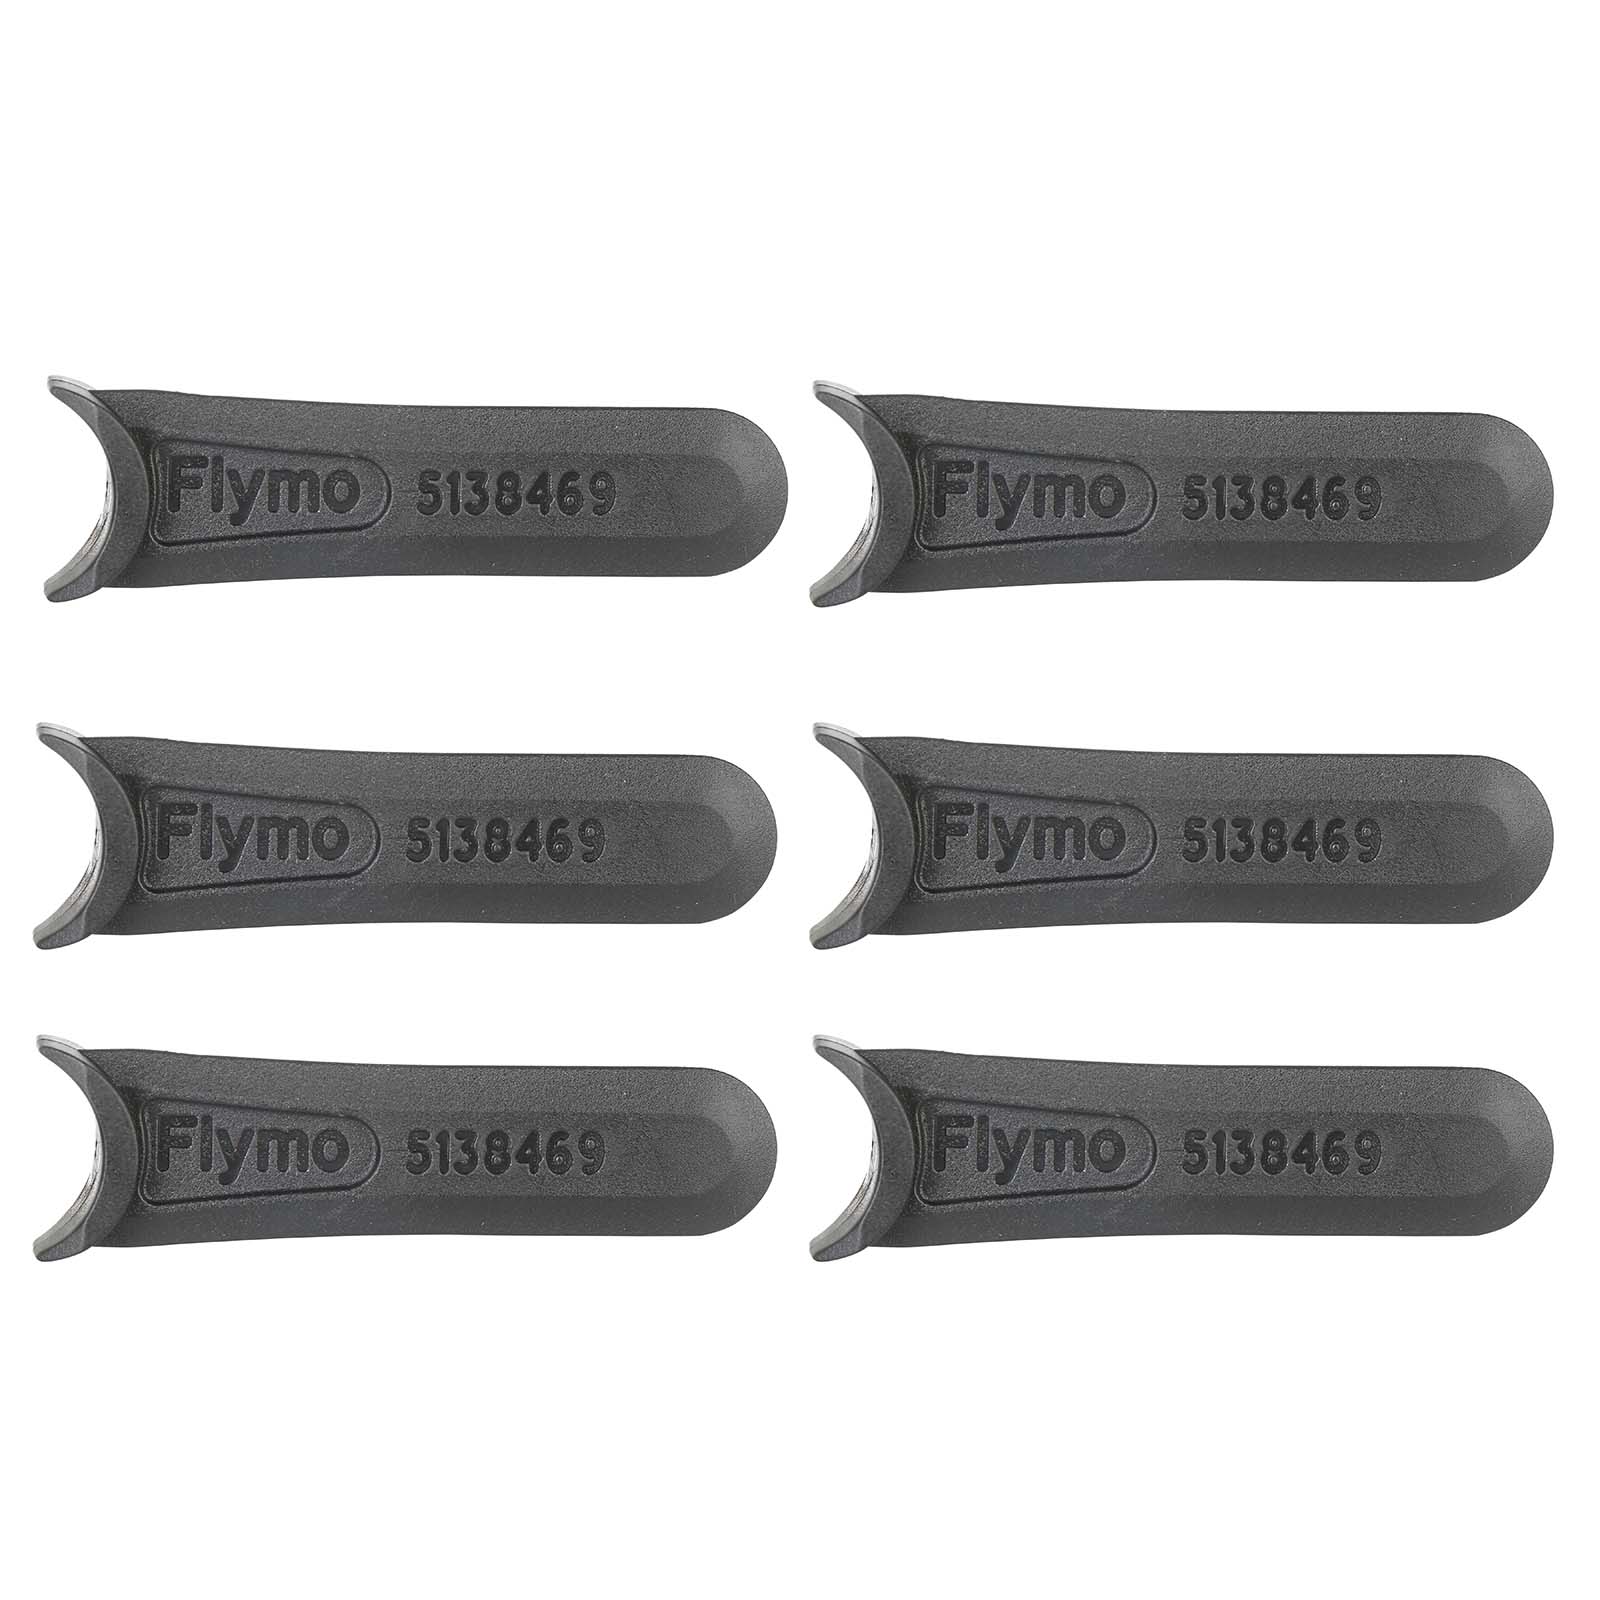 Flymo Lawn Mower Blade - FLY014 (Pack of 6)